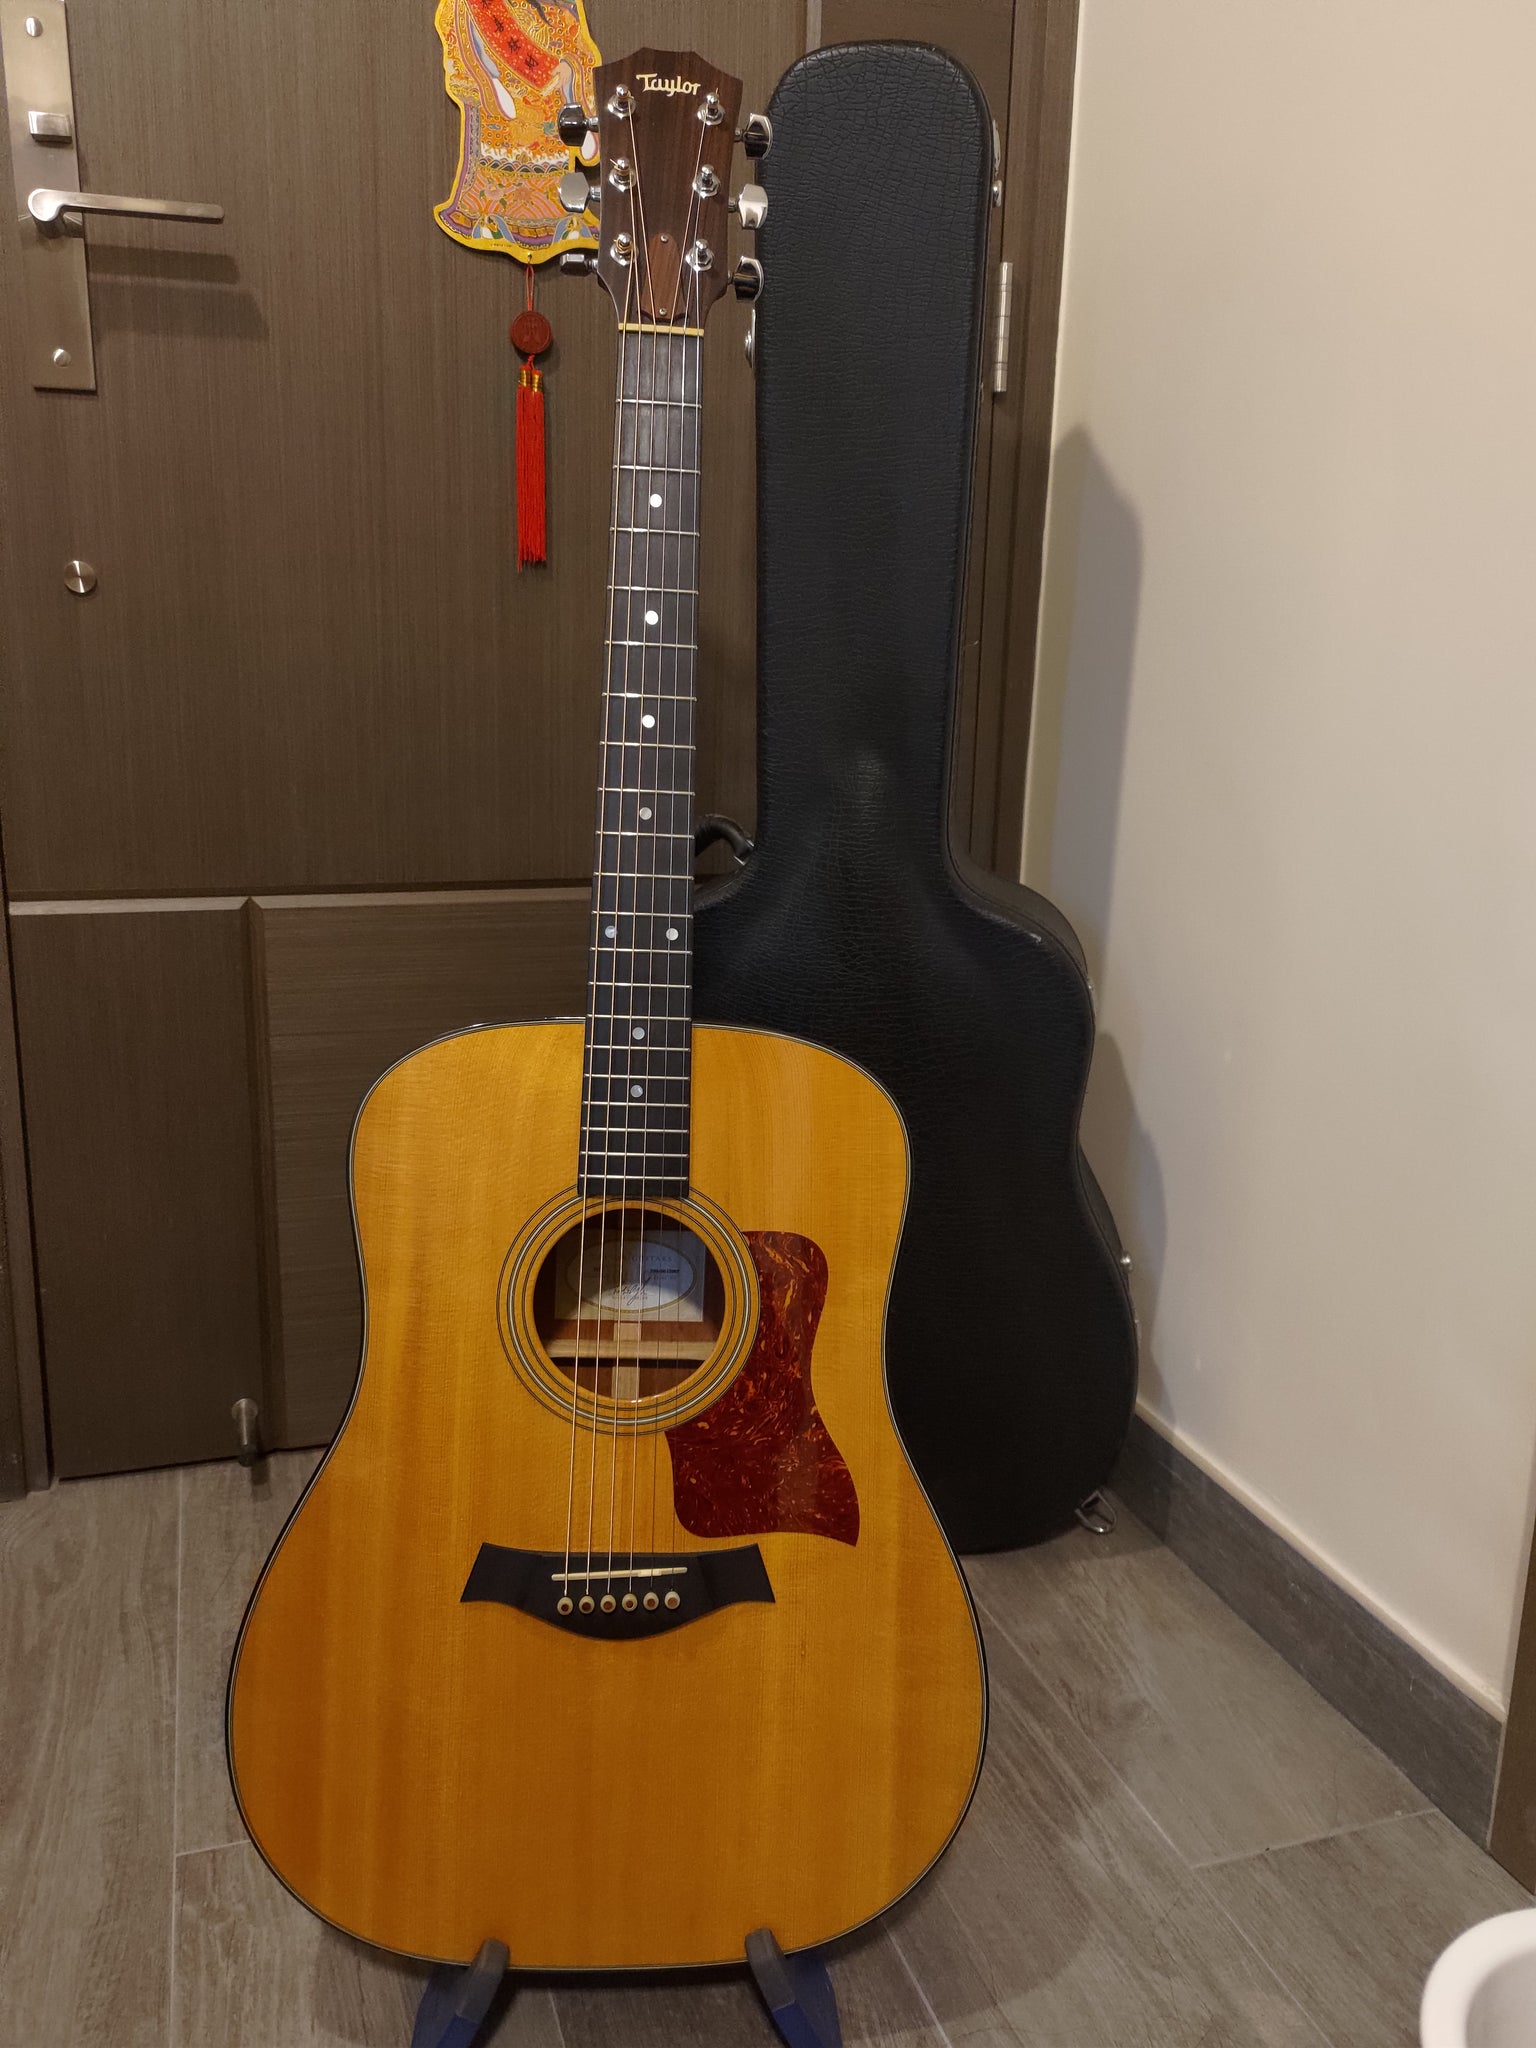 [2nd hand] Taylor 310 All Solid Acoustic Guitar 全單板民謠木結他/吉他